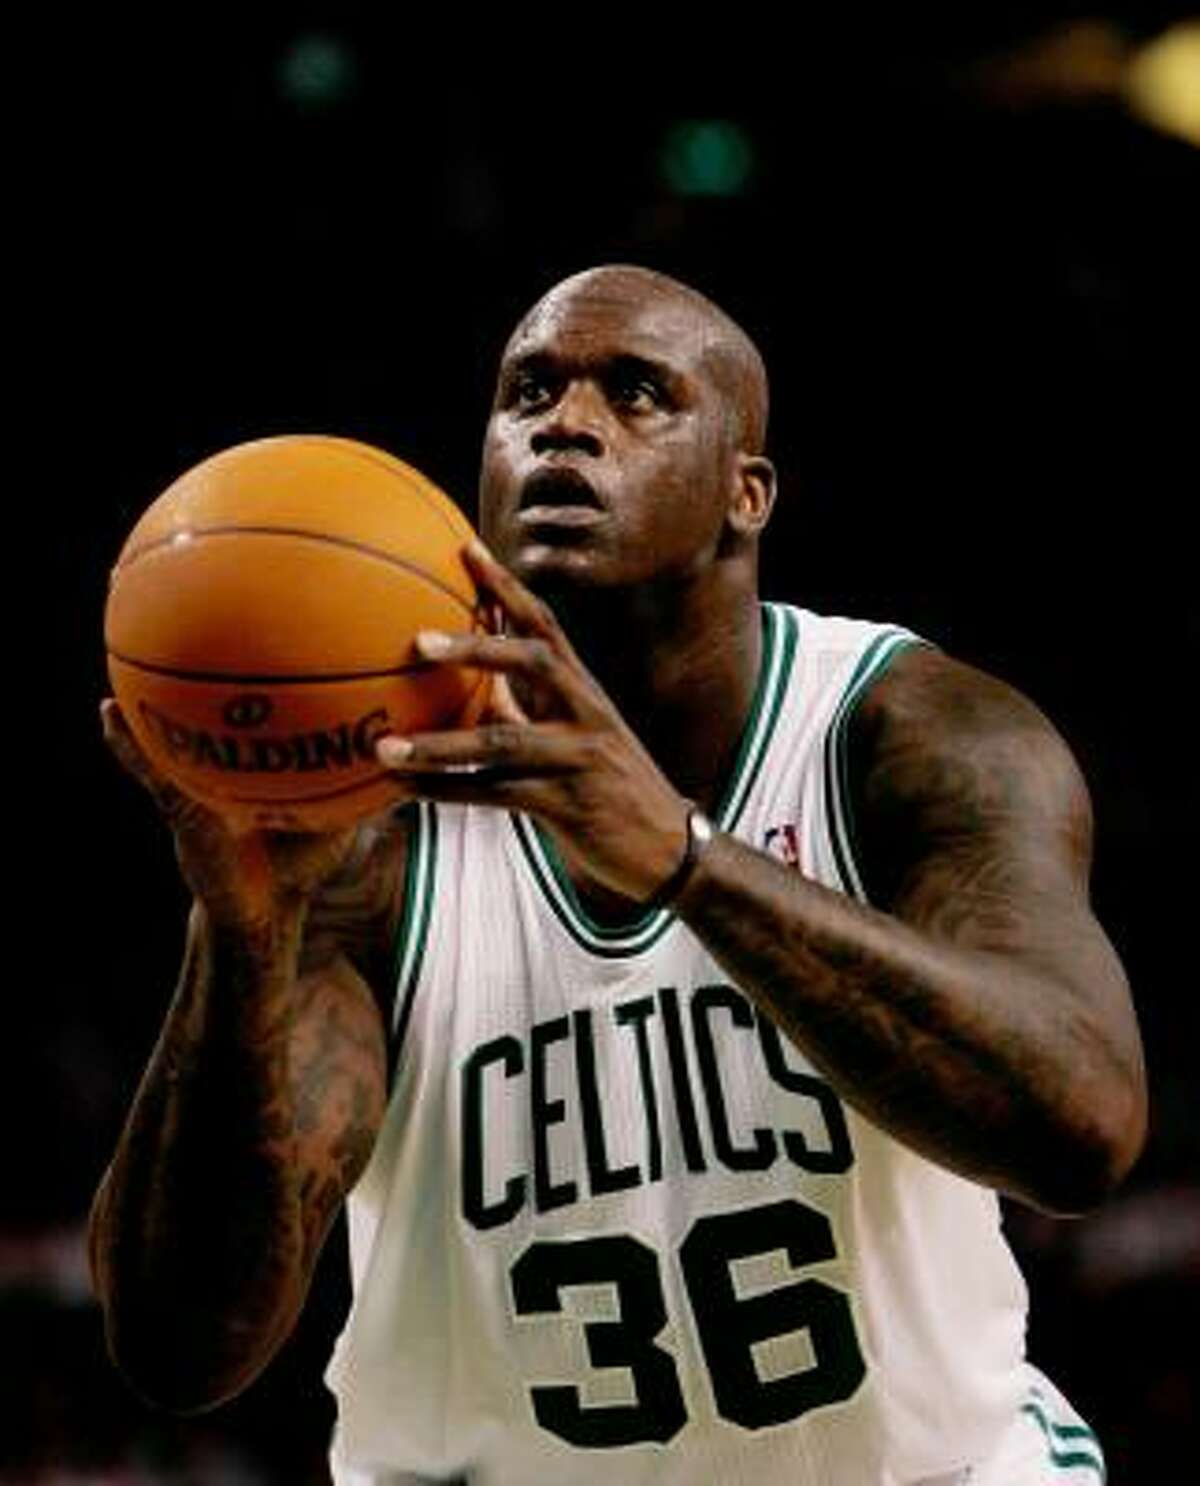 Shaquille O'Neal played high school basketball at San Antonio Cole.